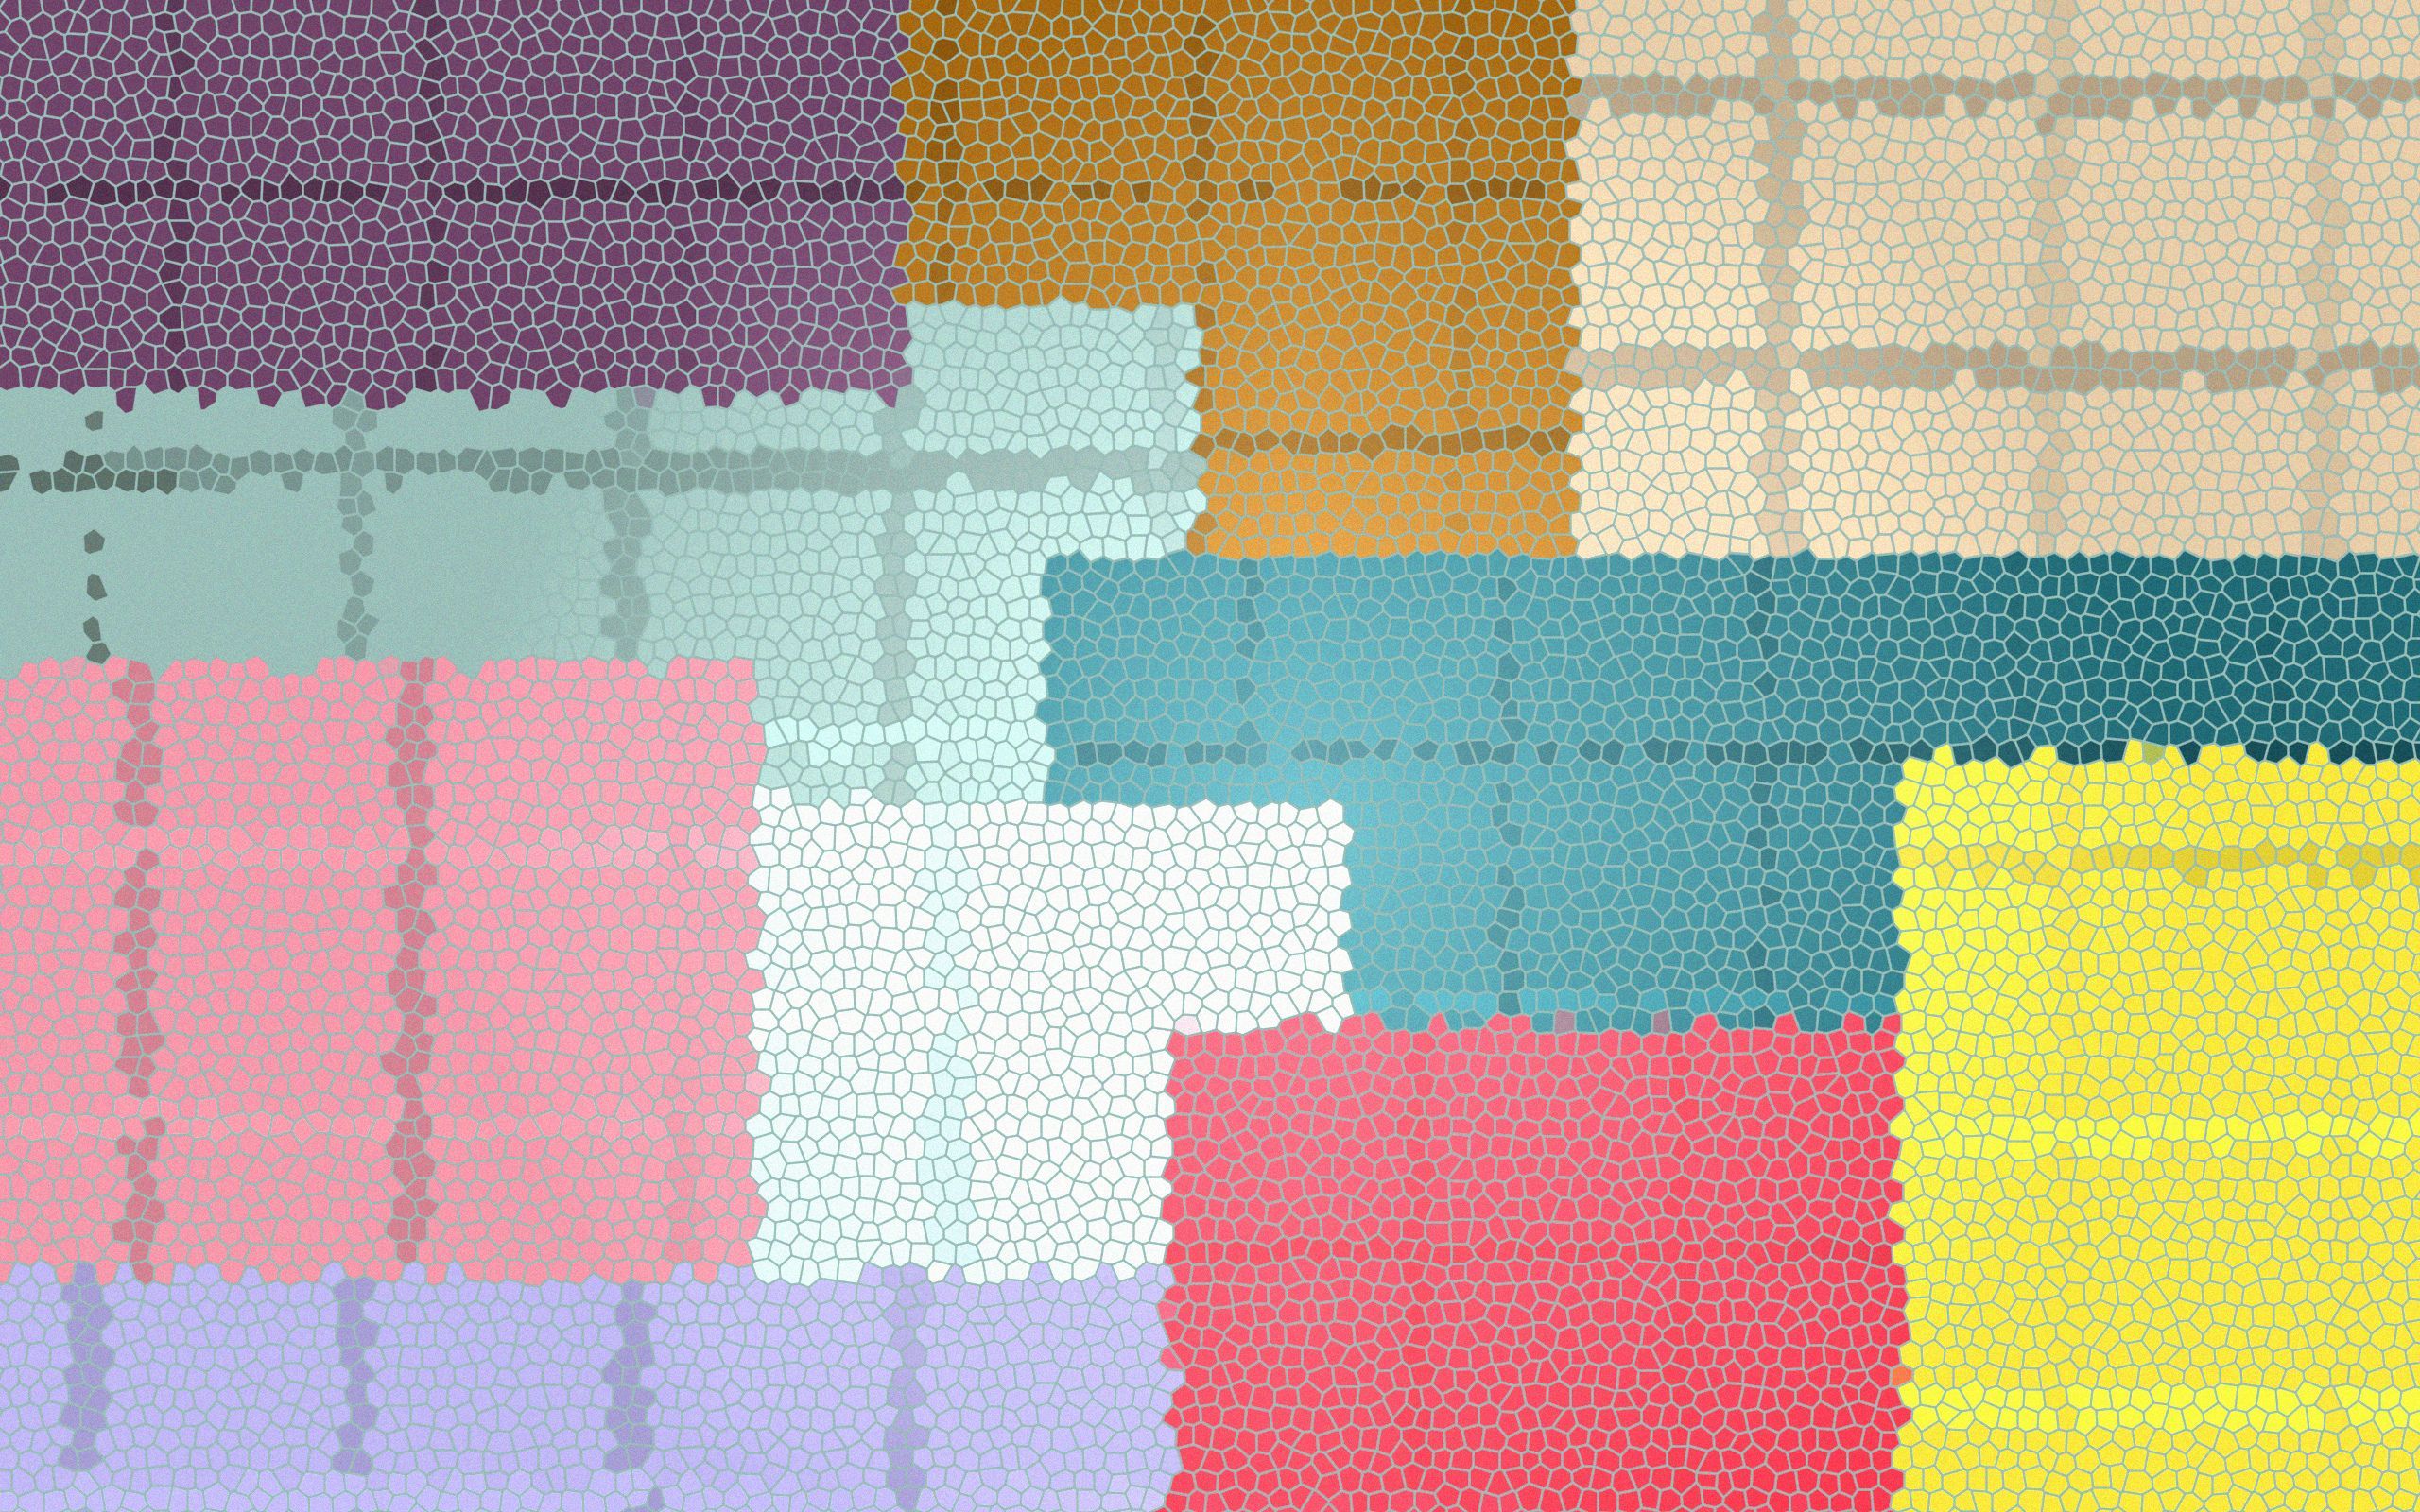 A mosaic of many different colored tiles - 2560x1600